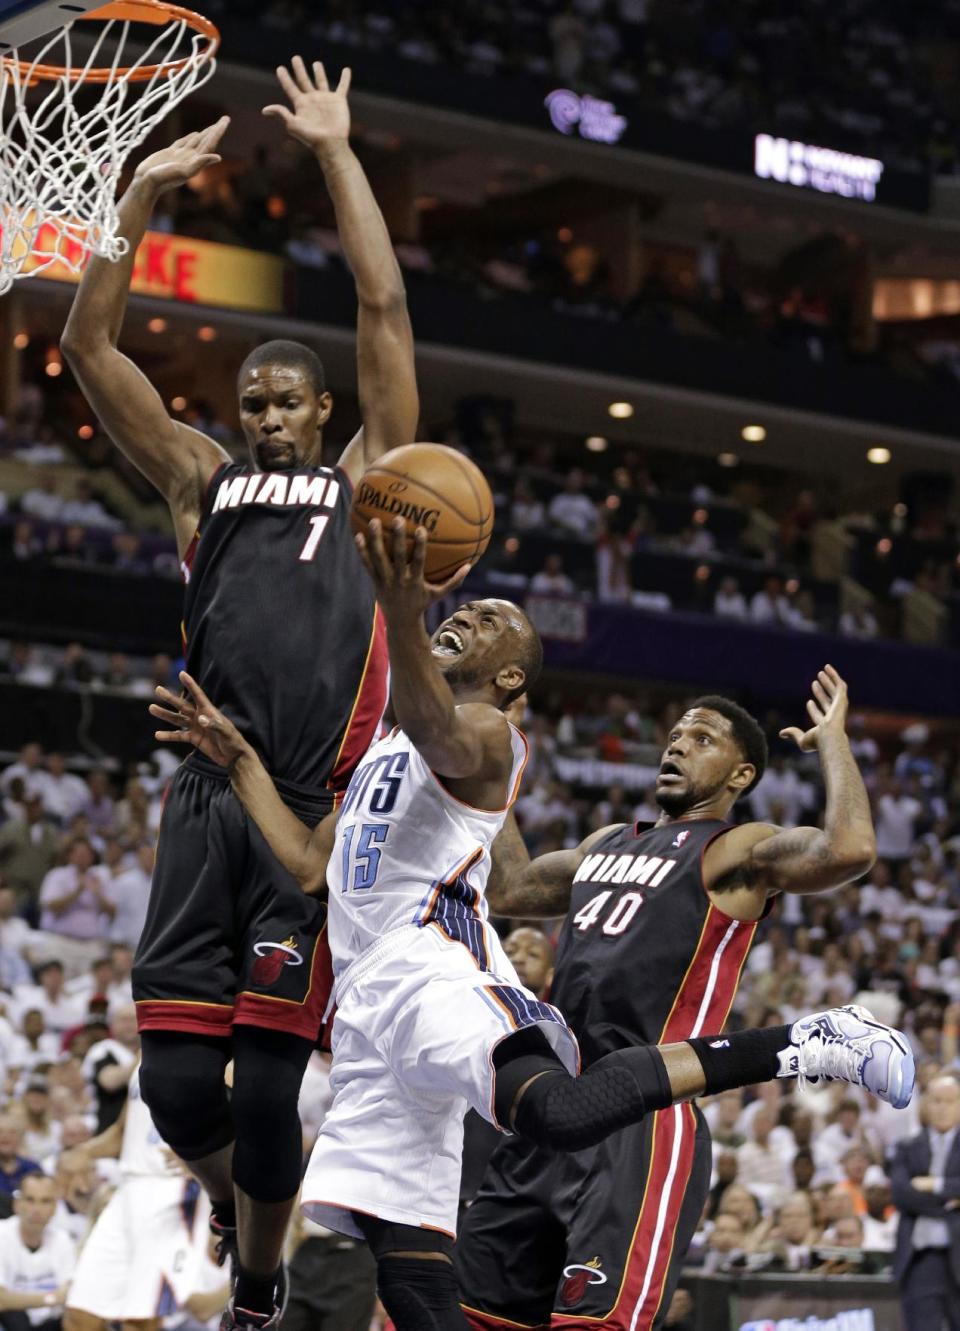 Charlotte Bobcats' Kemba Walker (15) is fouled as he drives between Miami Heat's Chris Bosh (1) and Udonis Haslem (40) during the first half in Game 3 of an opening-round NBA basketball playoff series in Charlotte, N.C., Saturday, April 26, 2014. (AP Photo/Chuck Burton)